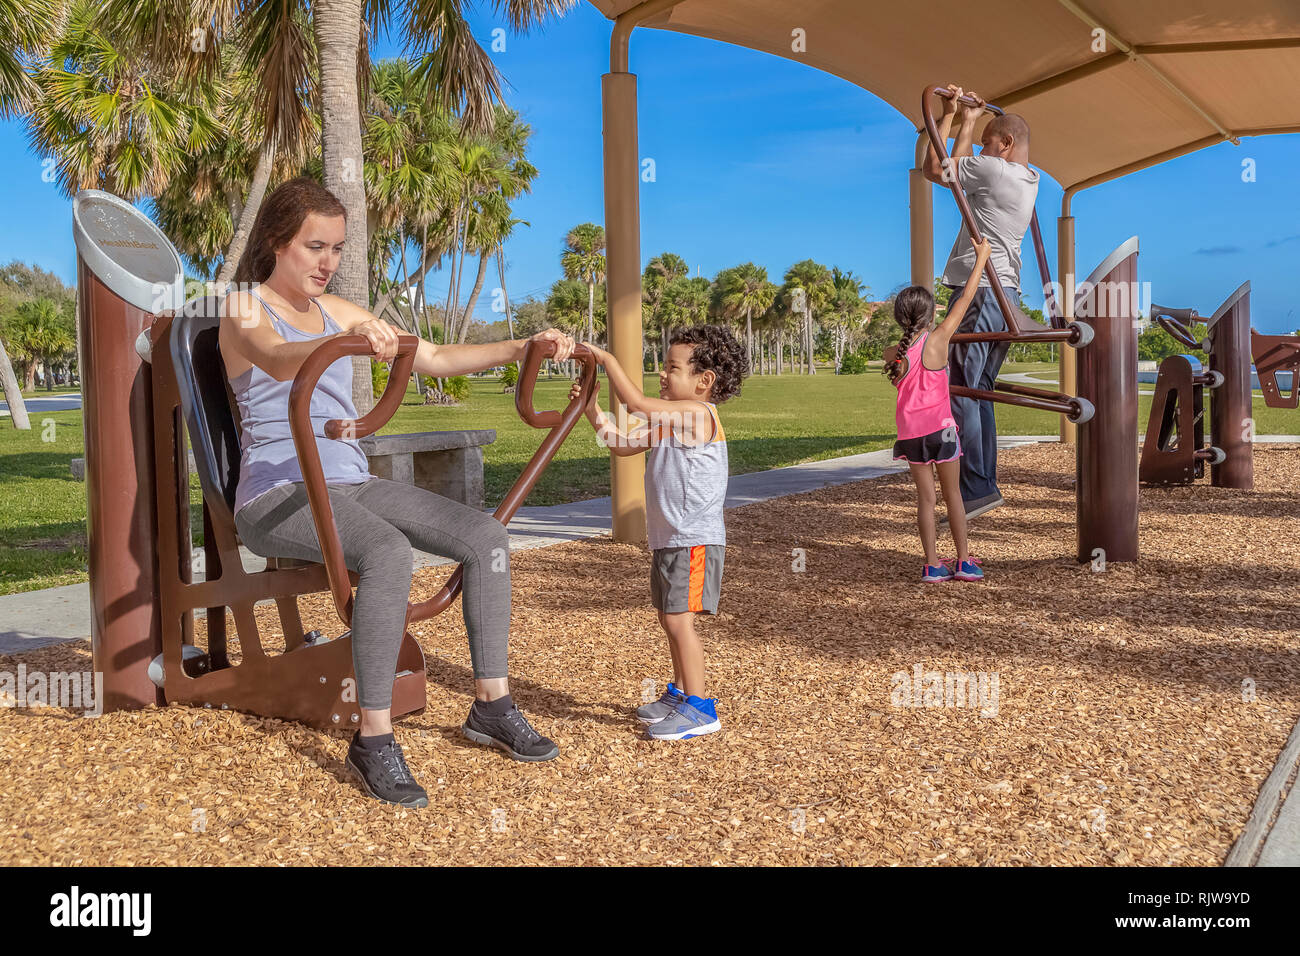 The modern family spends time at the outdoor gym working out together for better health. Teaching the kids healthy lifestyle habits at a young age. Stock Photo